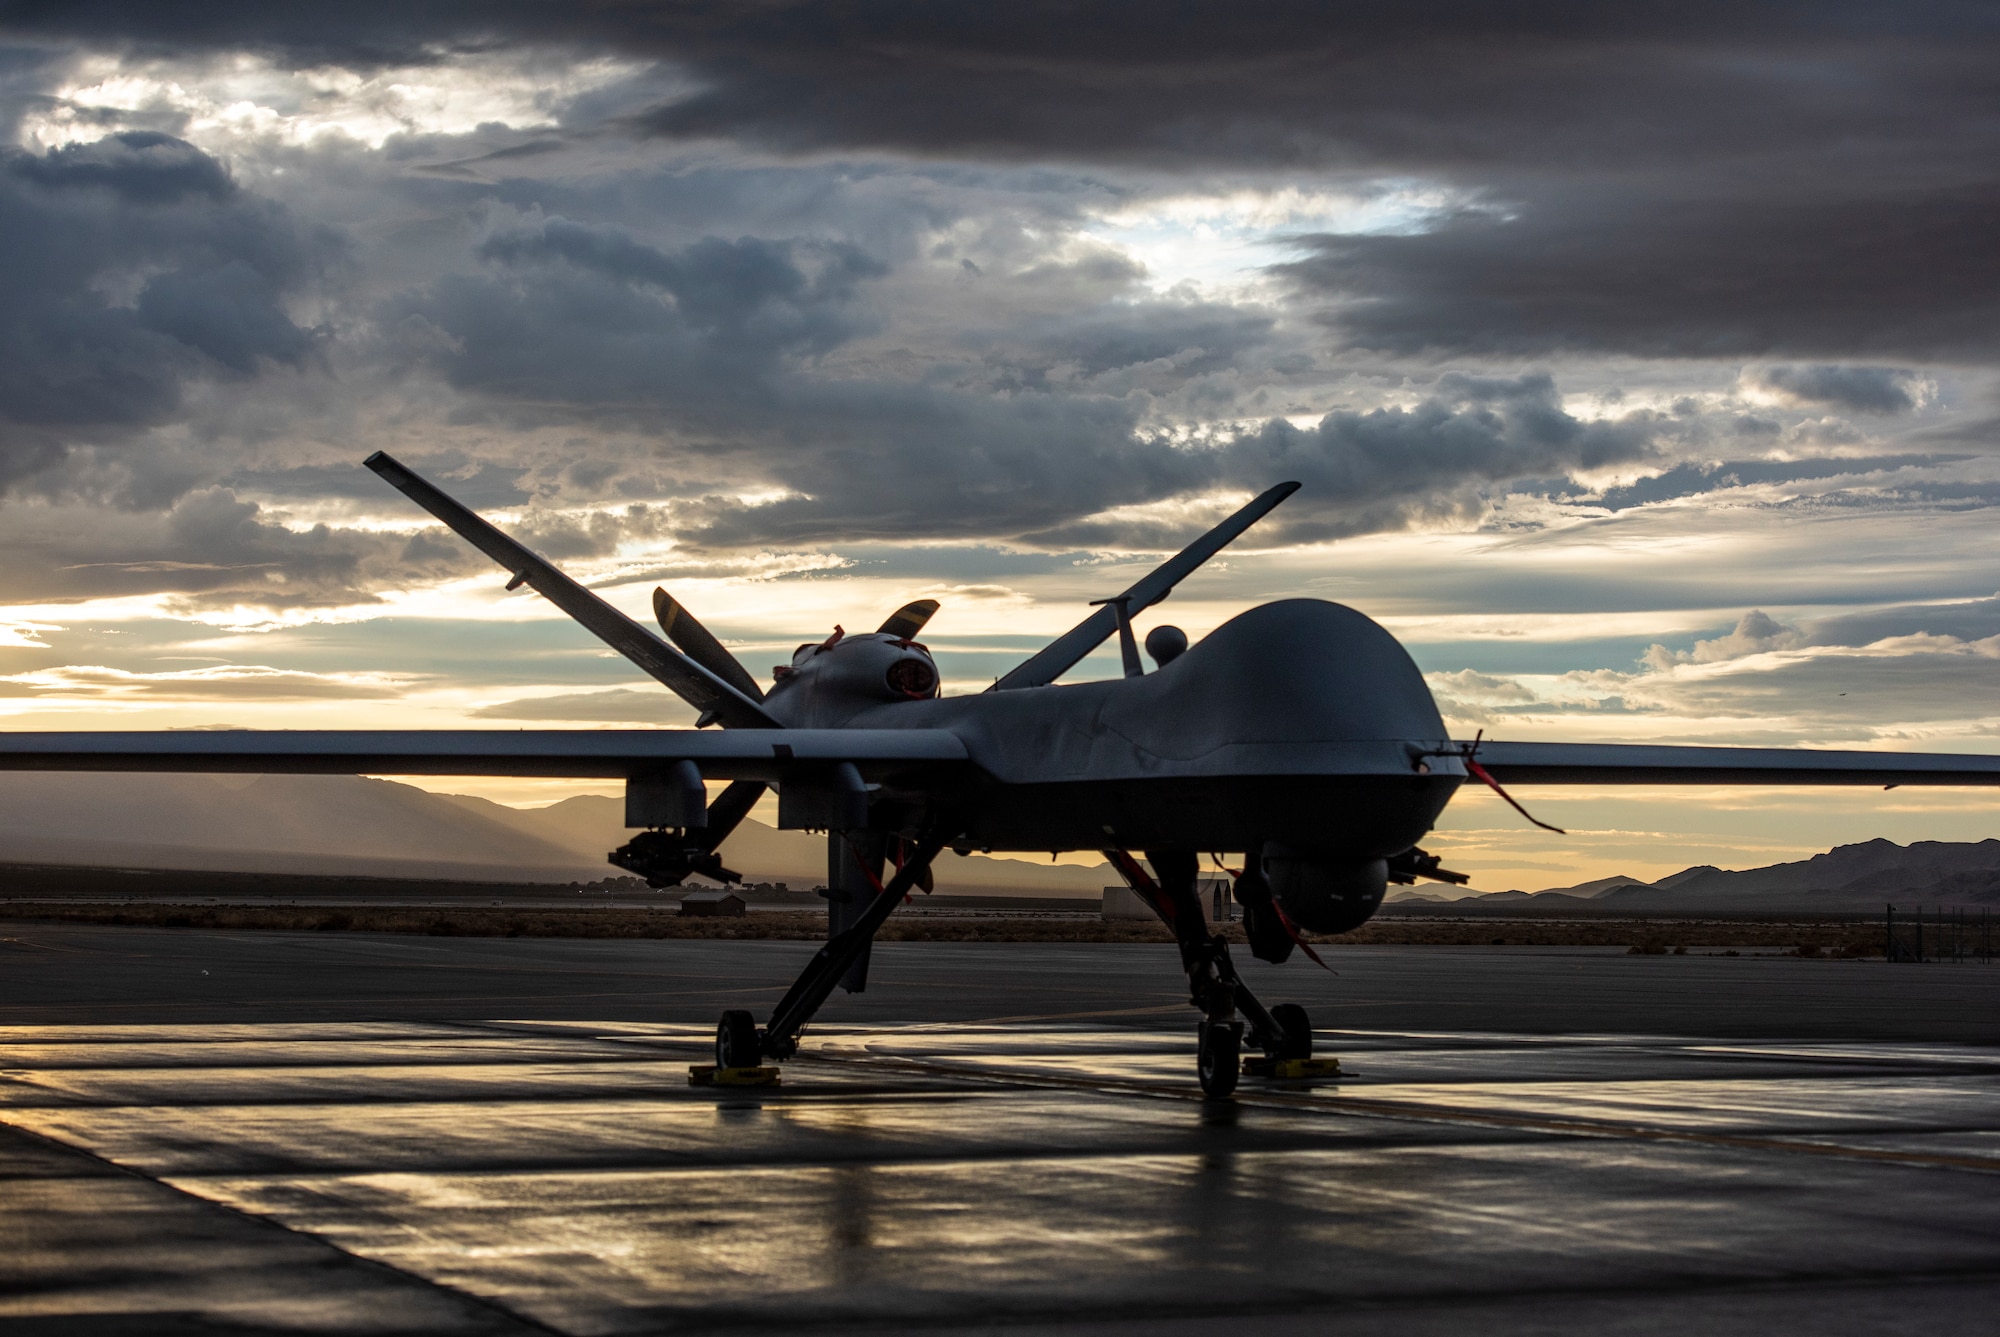 An MQ-9 Reaper sits on the flight line as the sun sets at Creech Air Force Base, Nev., Nov. 20, 2019. The Reaper provides dominant, persistent attack and reconnaissance 24/7/365. (U.S. Air Force photo by Airman 1st Class William Rio Rosado)